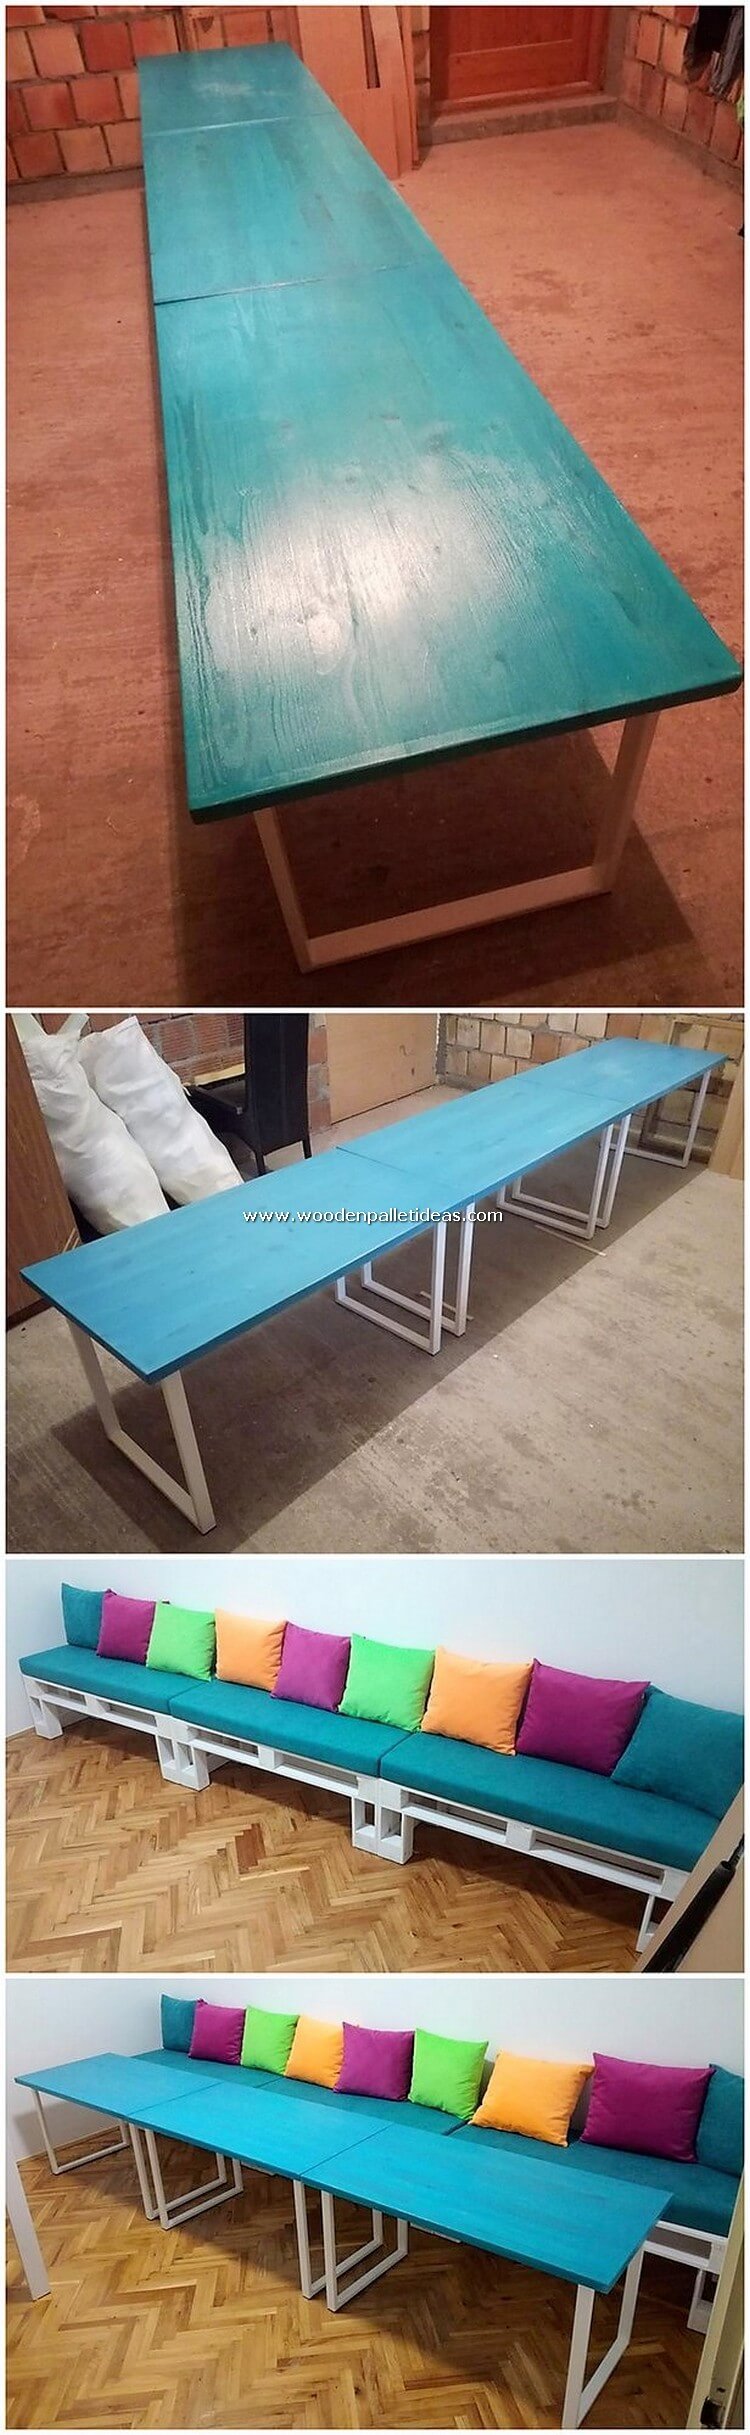 Pallet-Wood-Couch-and-Table